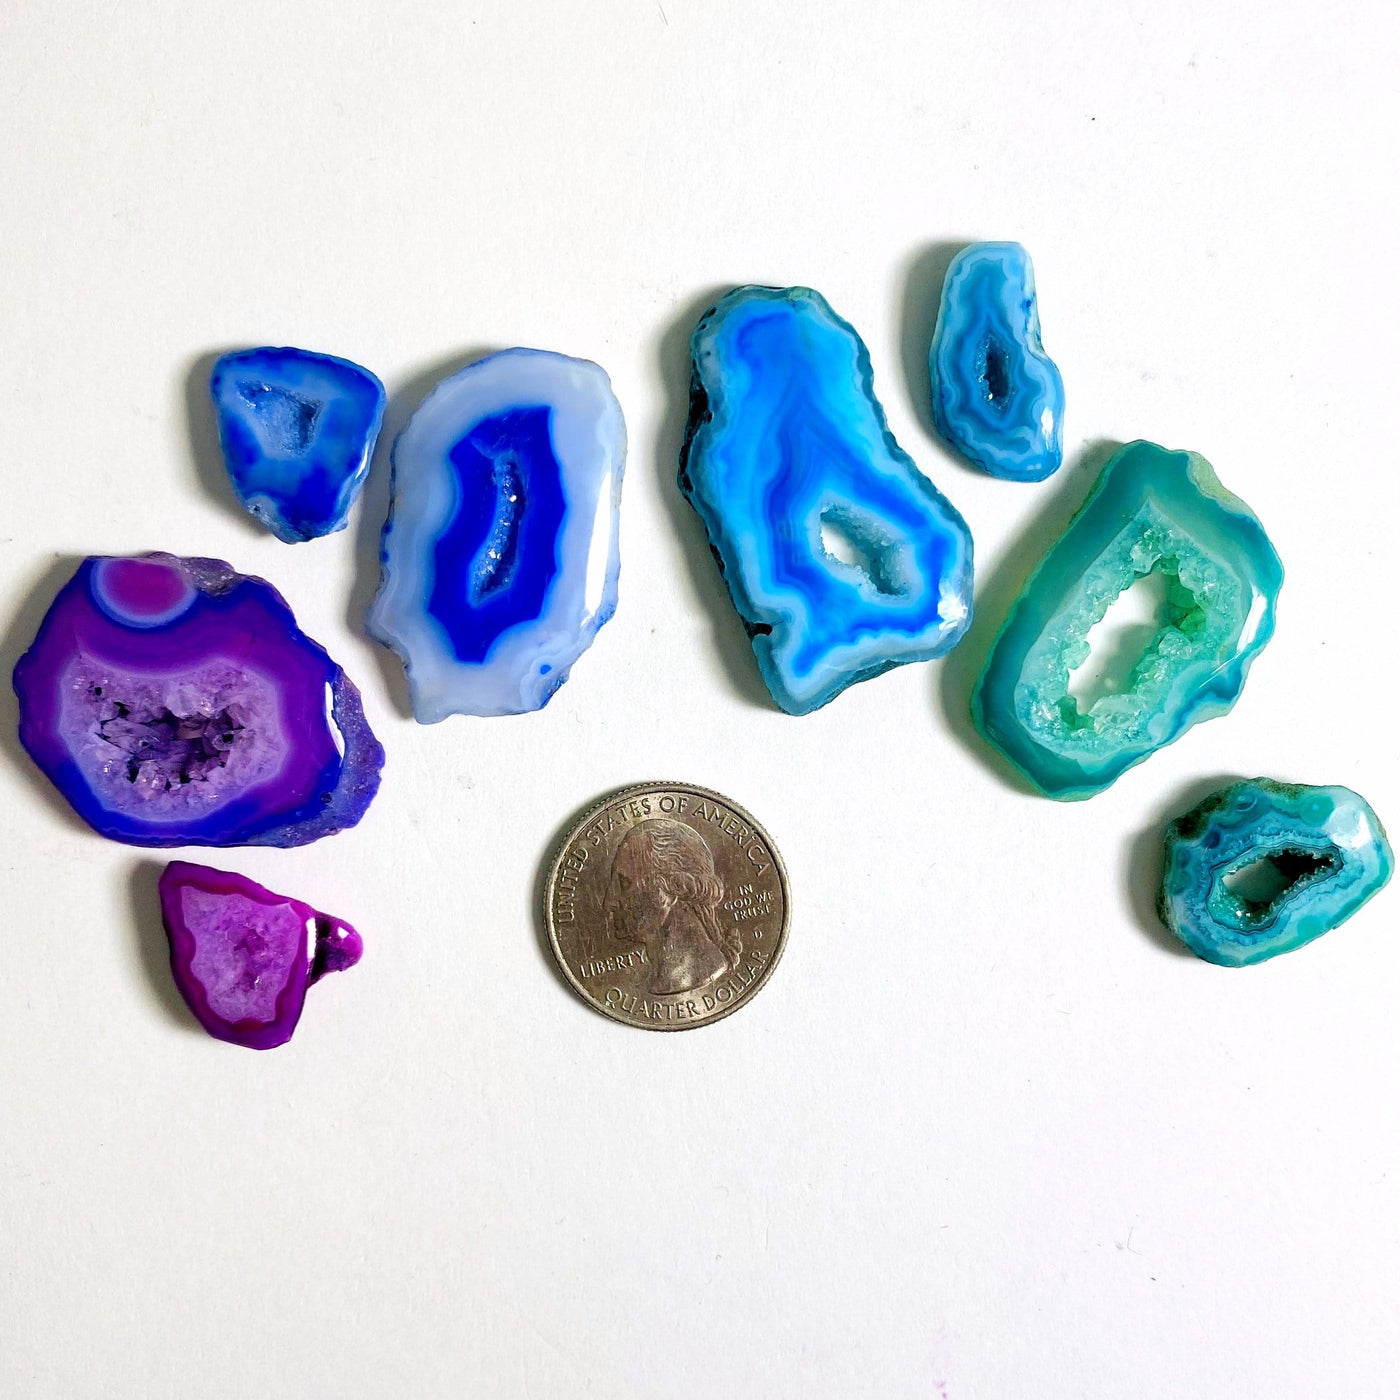 Multiple Agate Druzy Small Slices (RK140B21) next to a quarter for size reference.